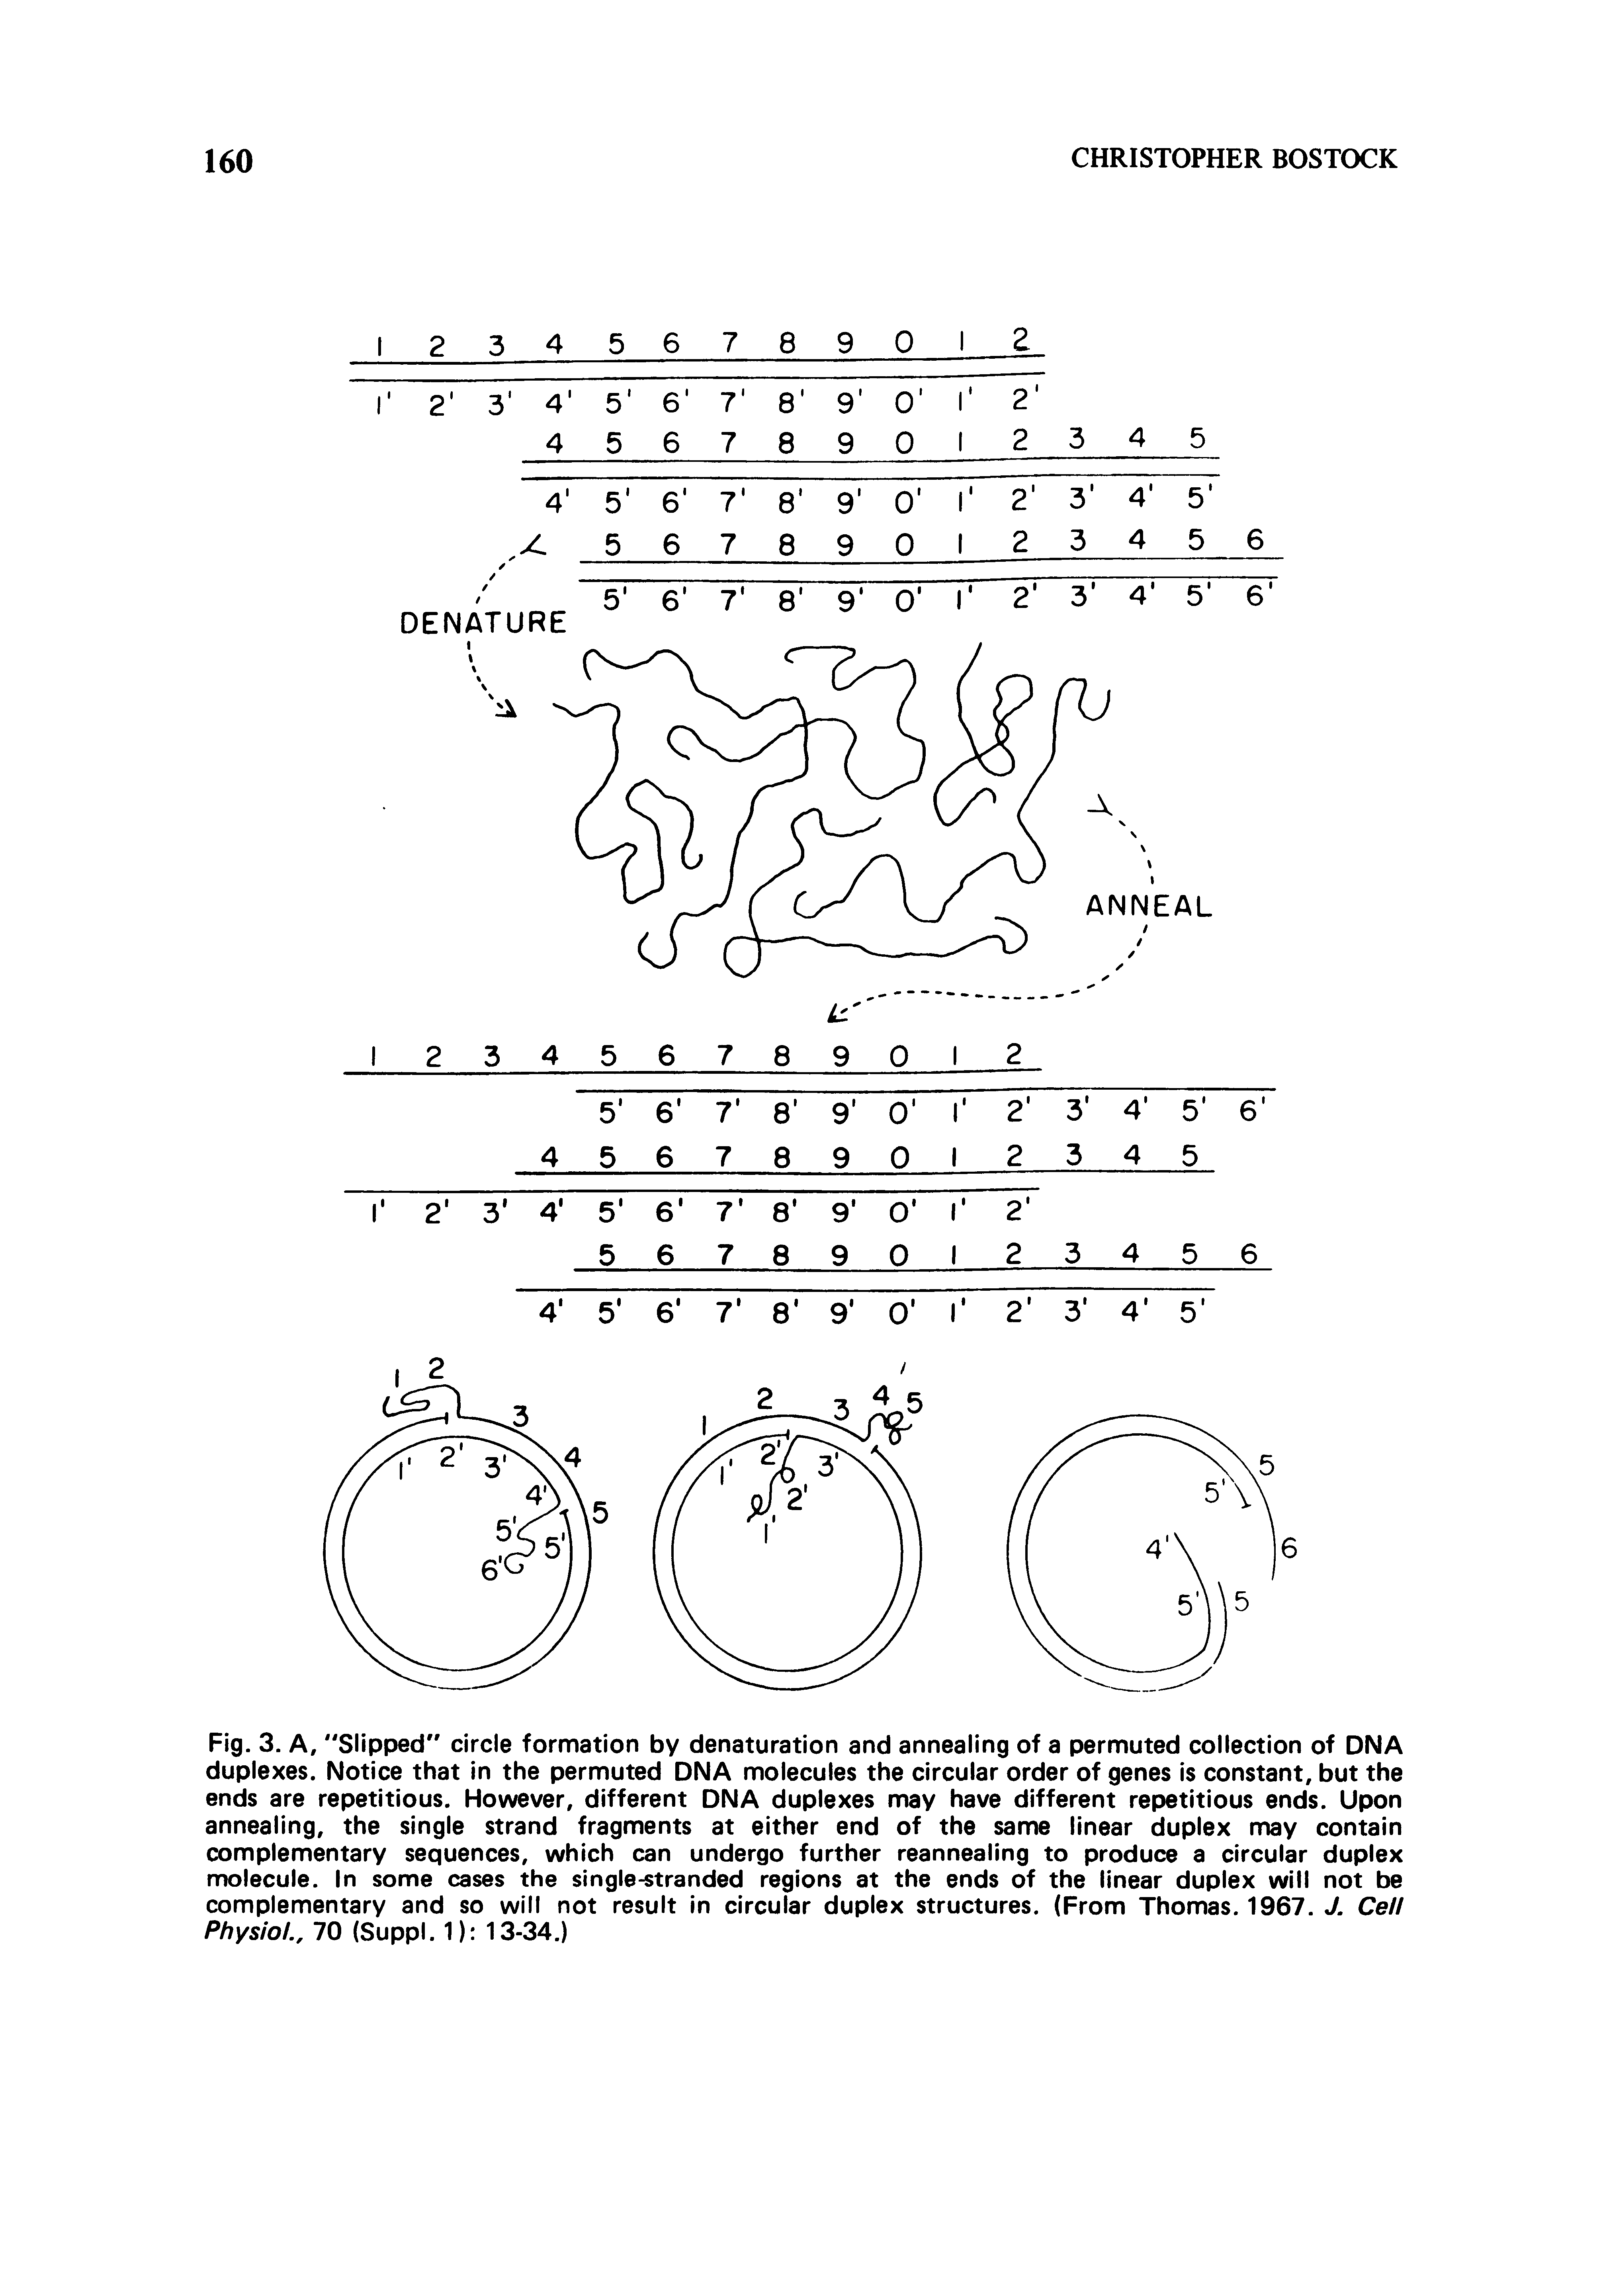 Fig. 3. A, "Slipped" circle formation by denaturation and annealing of a permuted collection of DNA duplexes. Notice that in the permuted DNA molecules the circular order of genes is constant, but the ends are repetitious. However, different DNA duplexes may have different repetitious ends. Upon annealing, the single strand fragments at either end of the same linear duplex may contain complementary sequences, which can undergo further reannealing to produce a circular duplex molecule. In some cases the single-stranded regions at the ends of the linear duplex will not be complementary and so will not result in circular duplex structures. (From Thomas. 1967. J. Cell Physio ., 70 (Suppl. 1) 13-34.)...